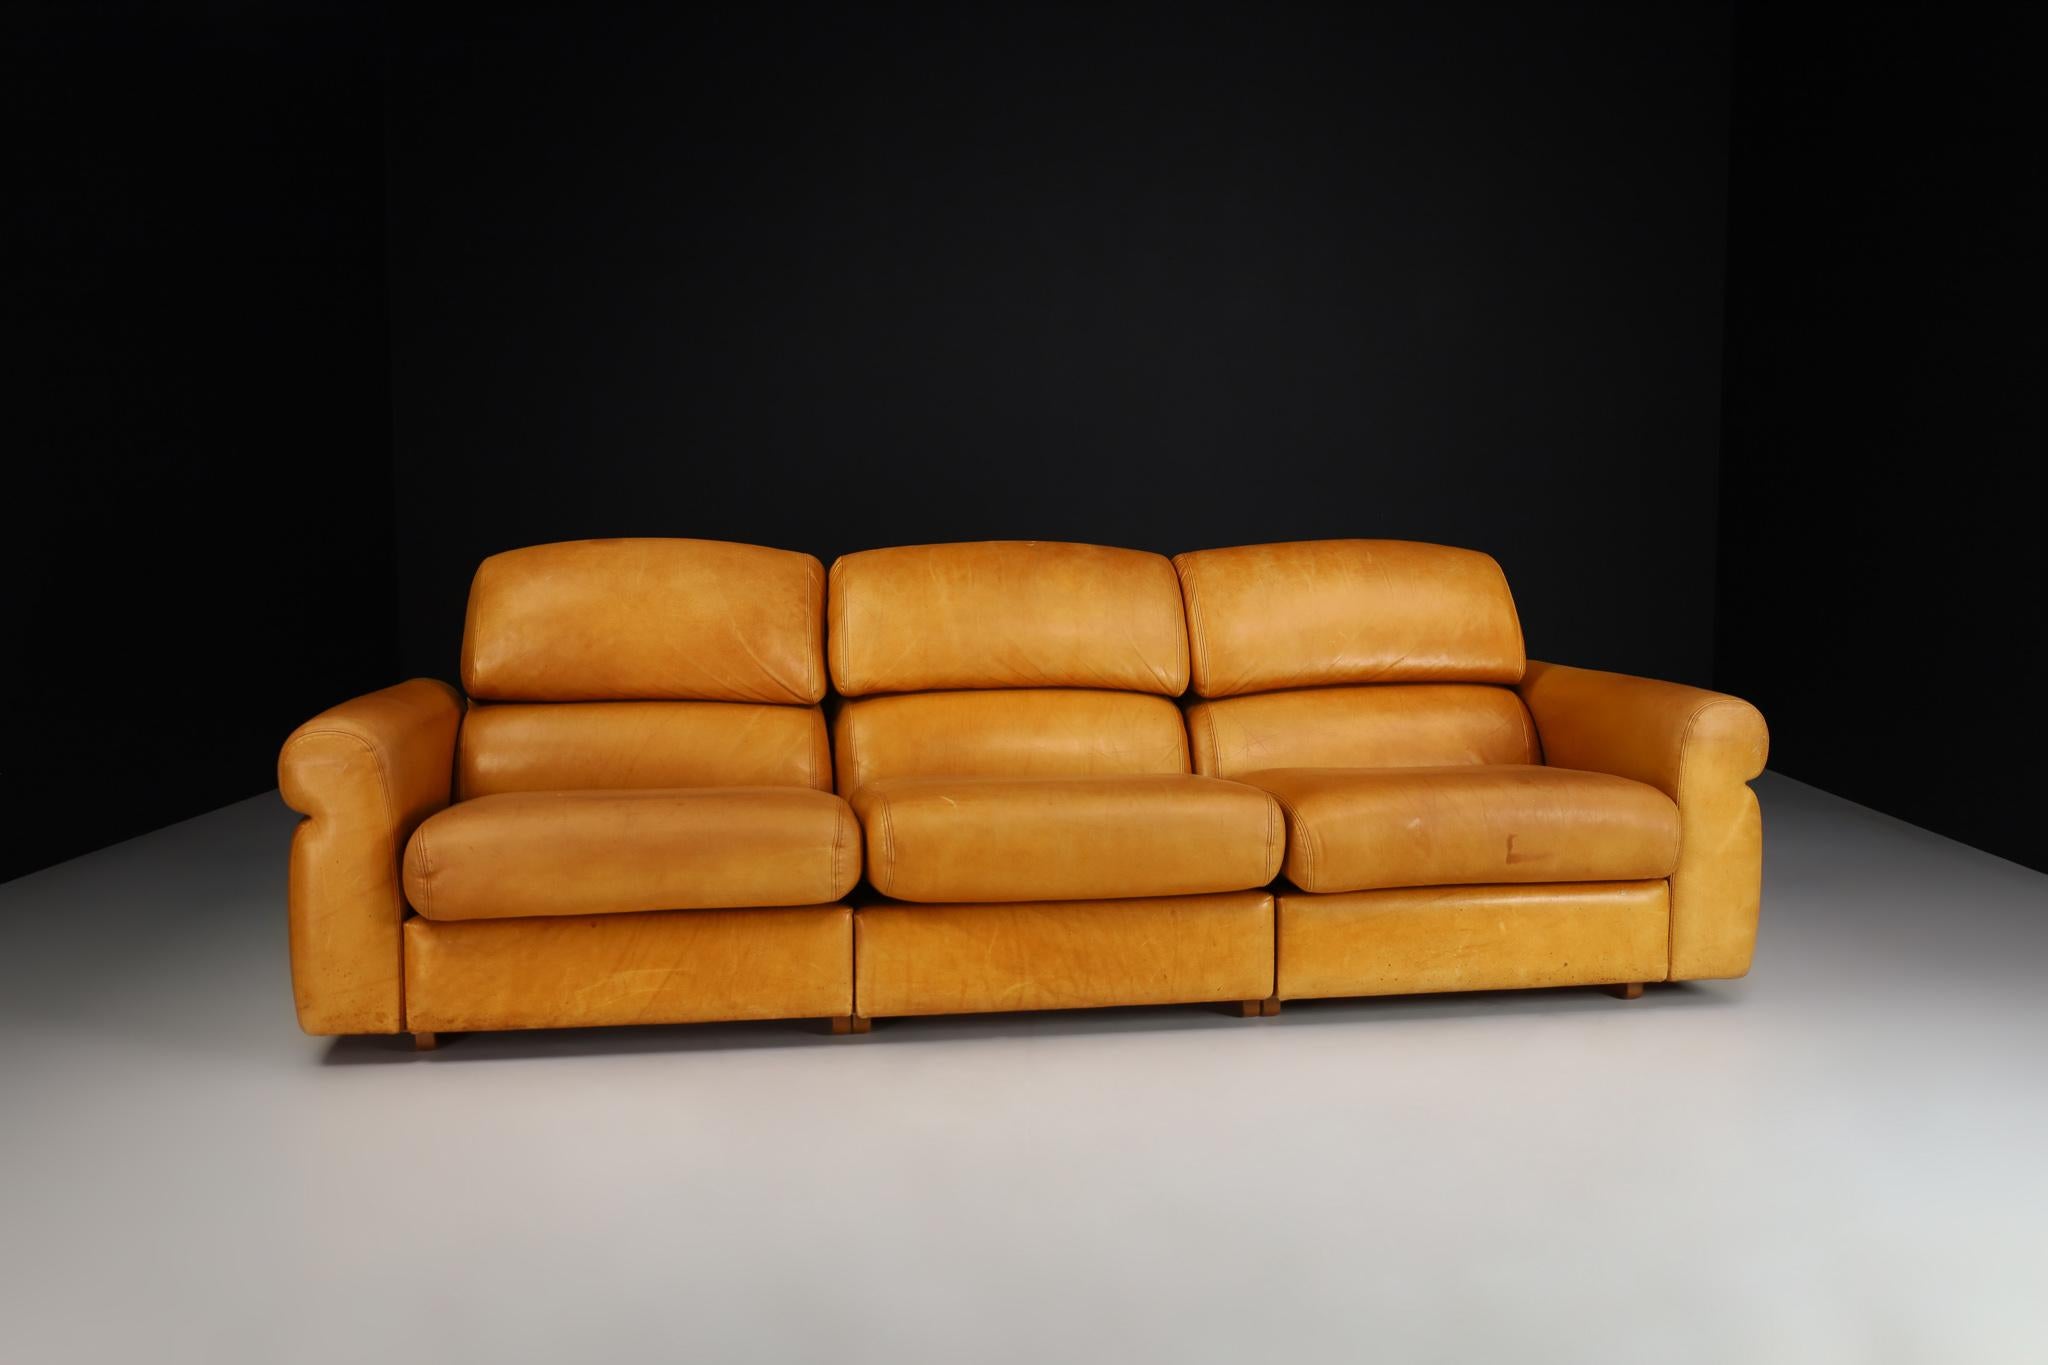 Large Mid-Century Modern Lounge Sofa in Cognac Leather, Italy 1960s For Sale 5